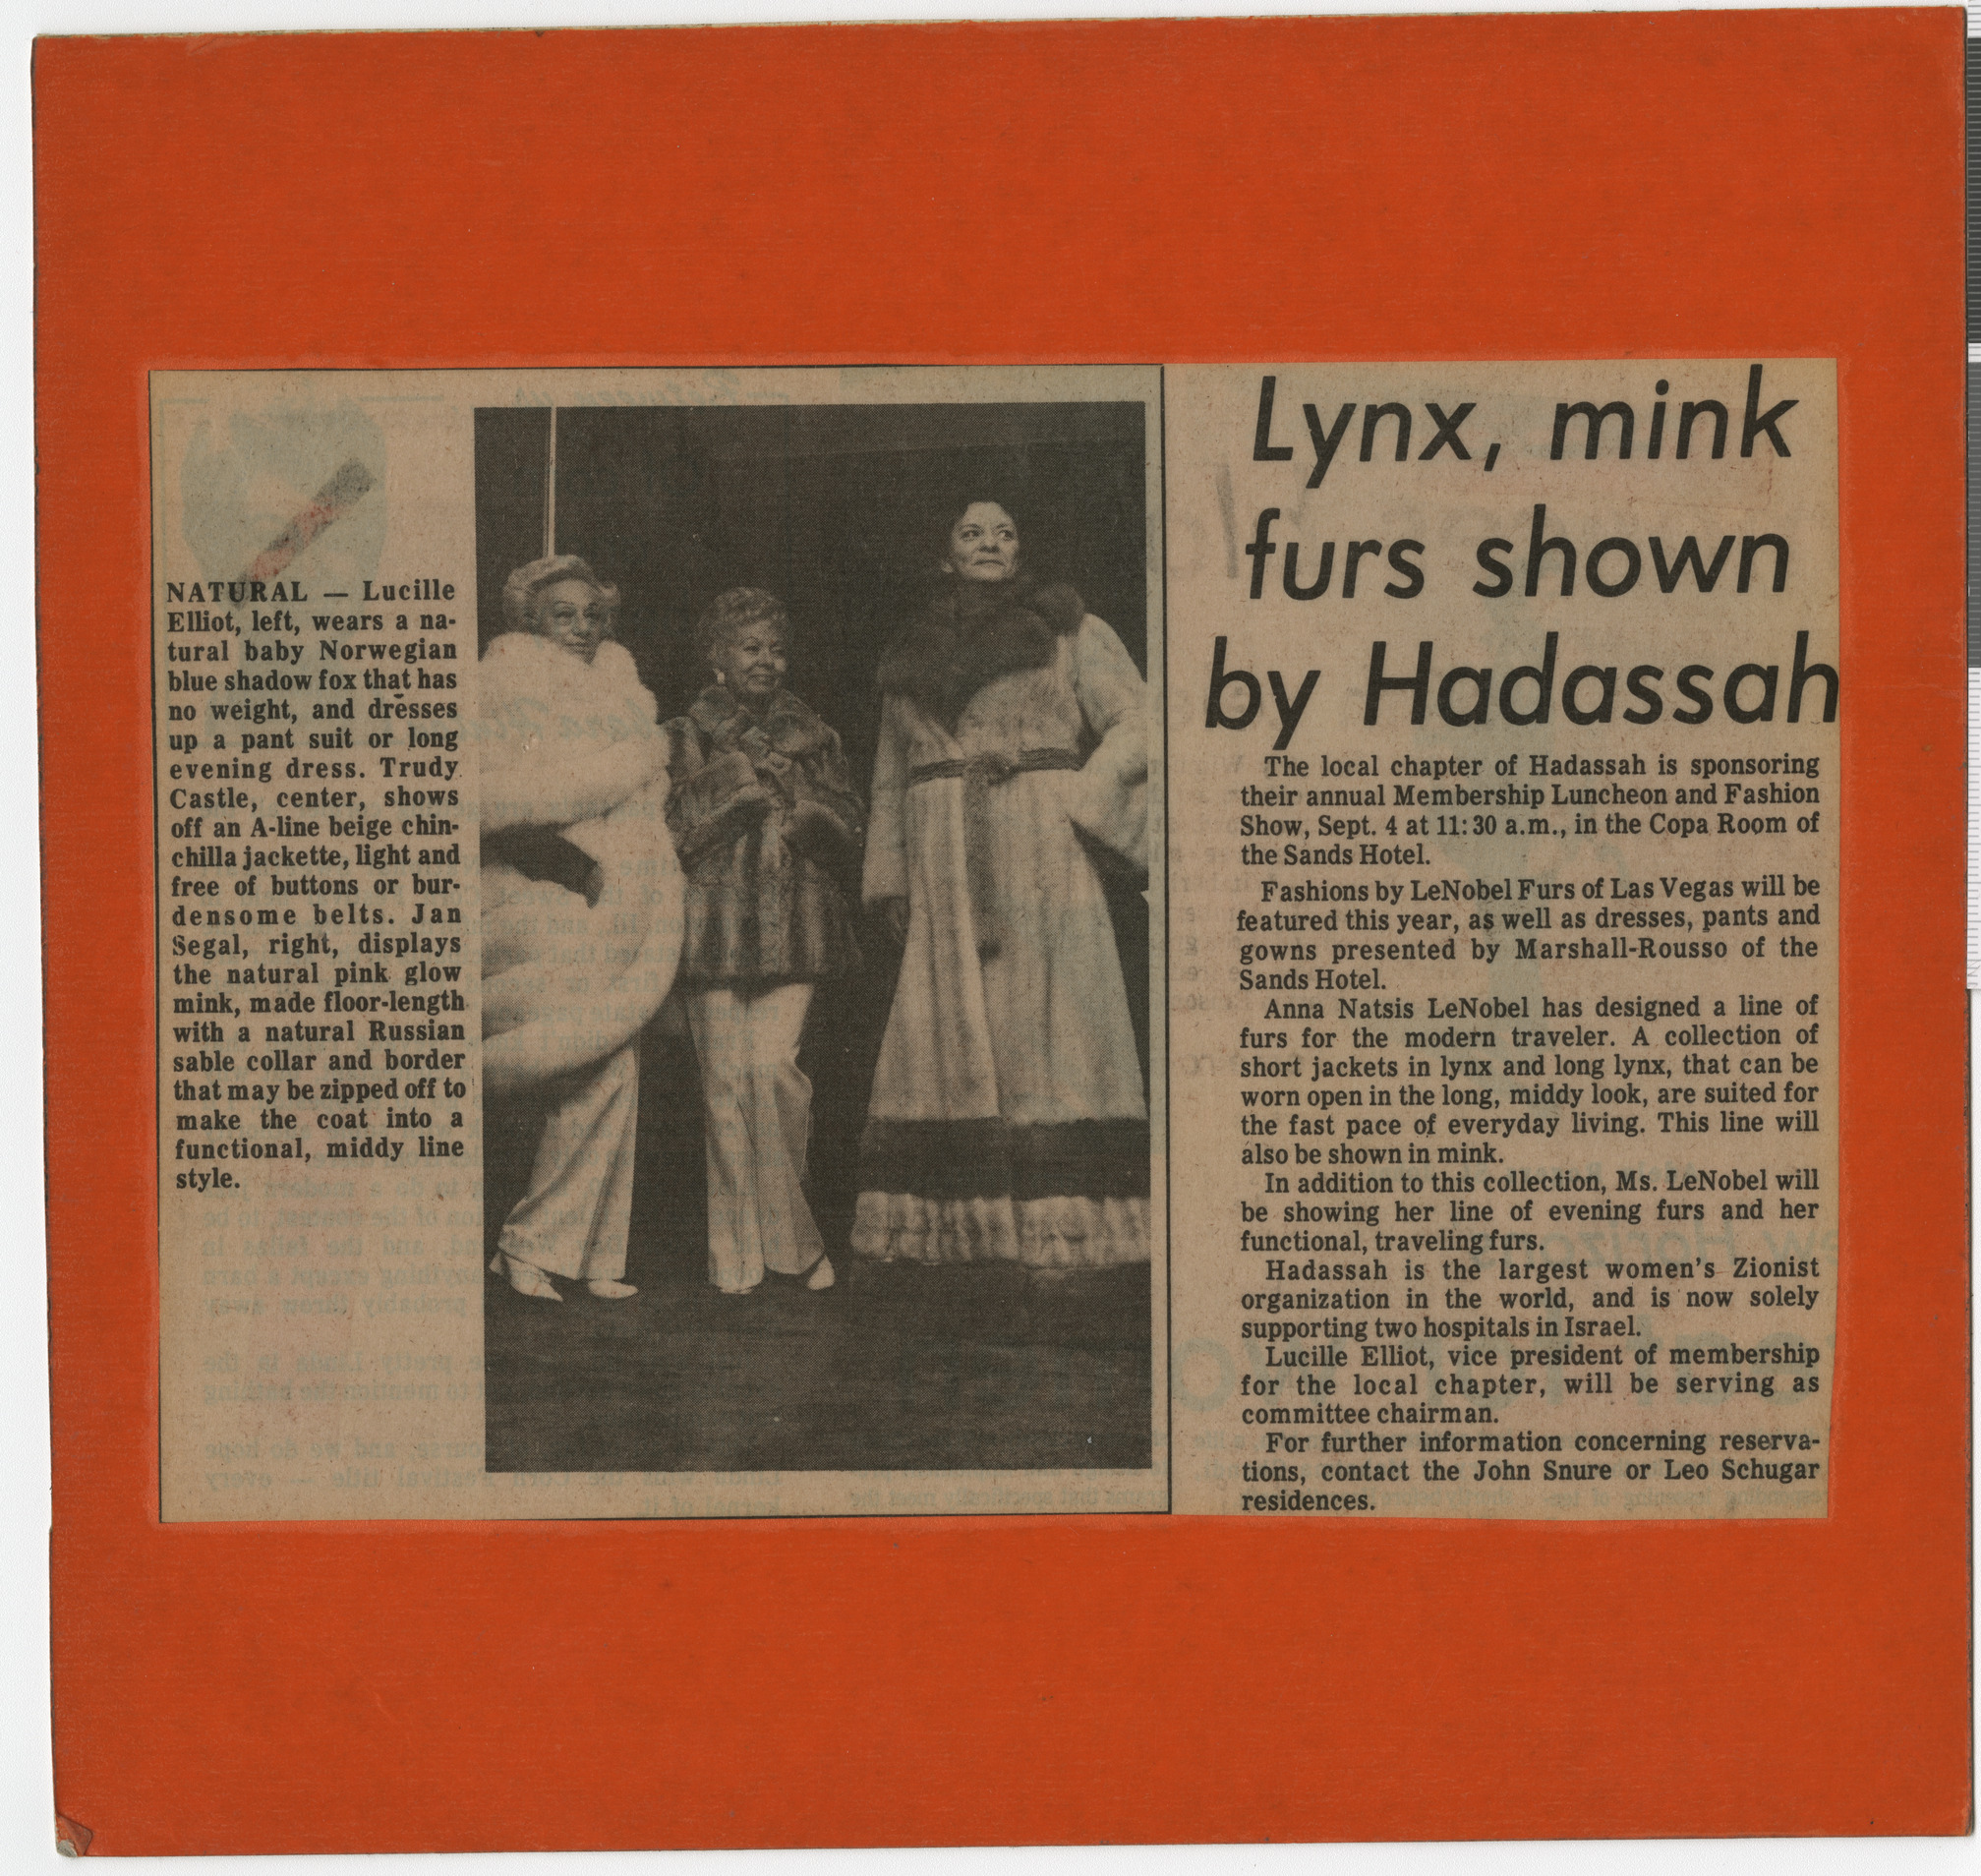 Newspaper clipping, Lynx, mink furs shown by Hadassah, publication and date unknown